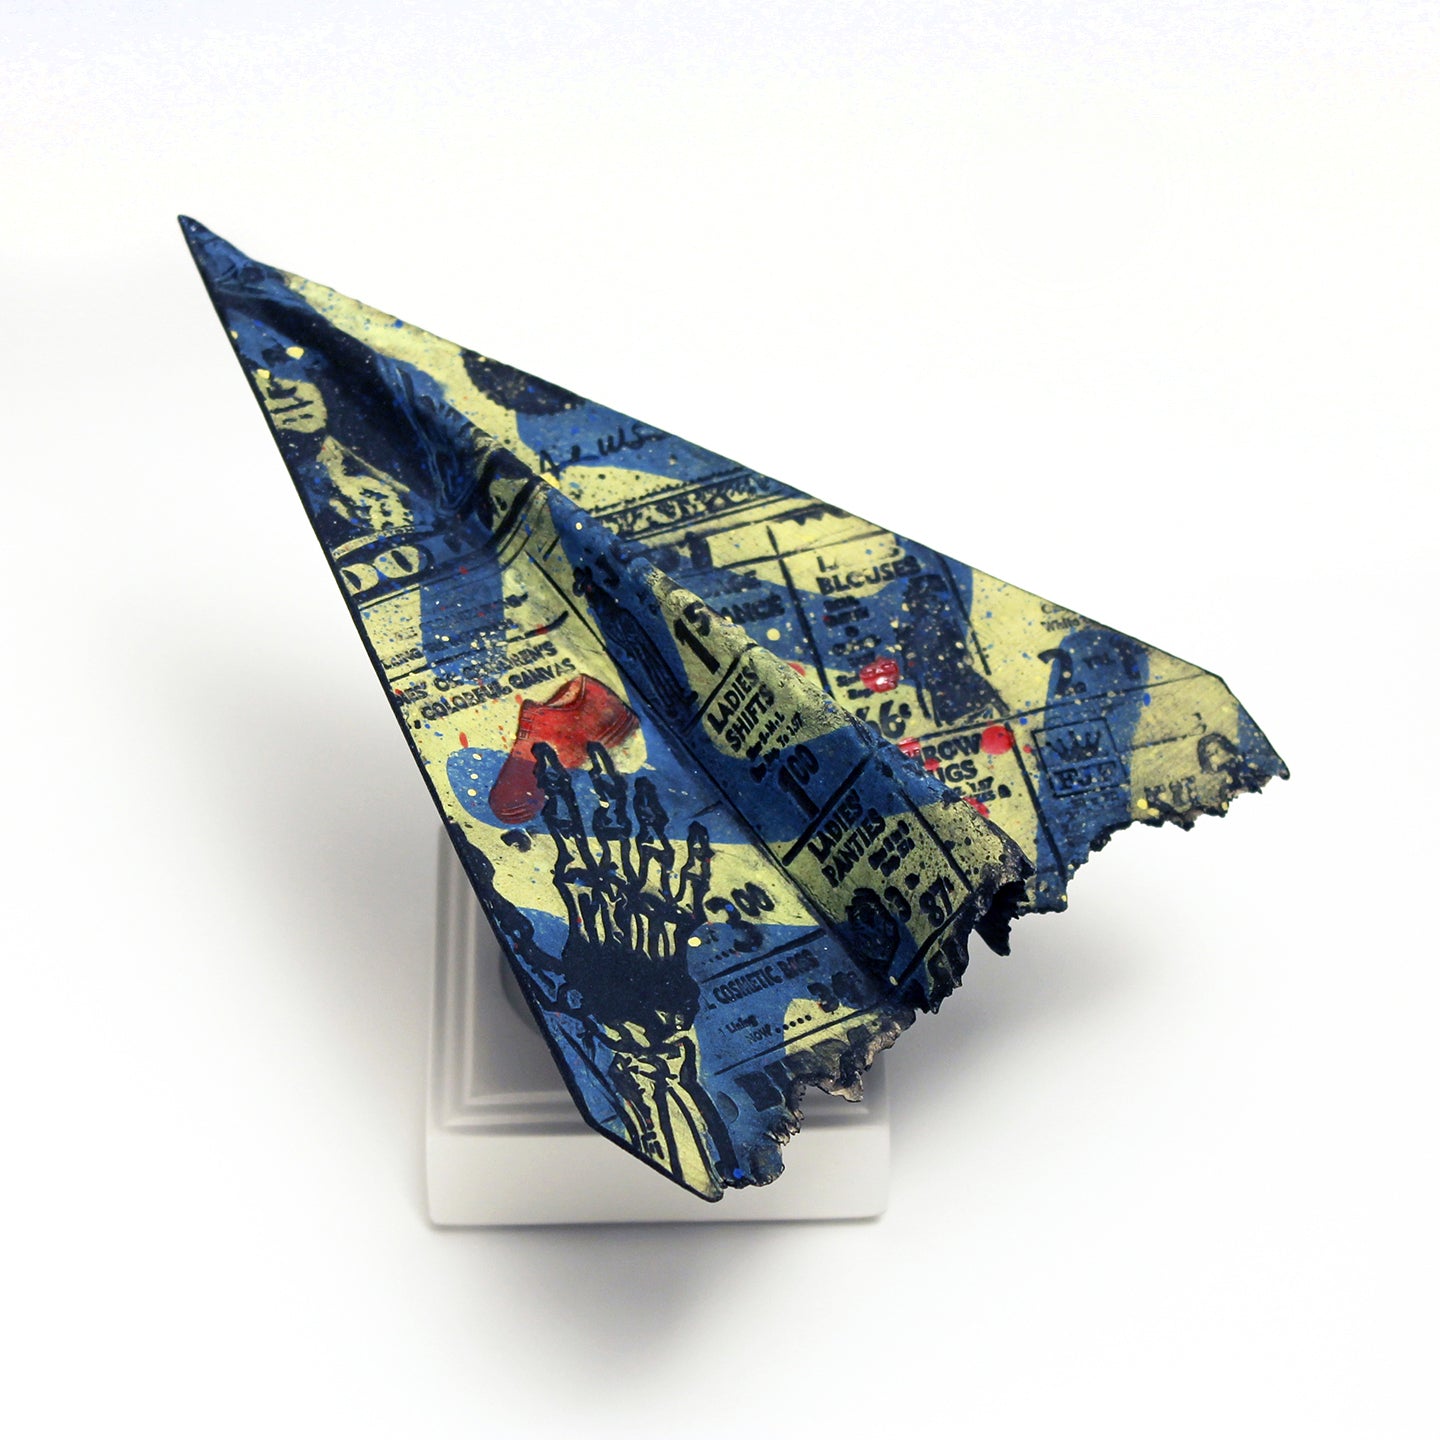 Frank James Fisher's clay paper airplanes are recognizable icons covered in graphics and commentary. 